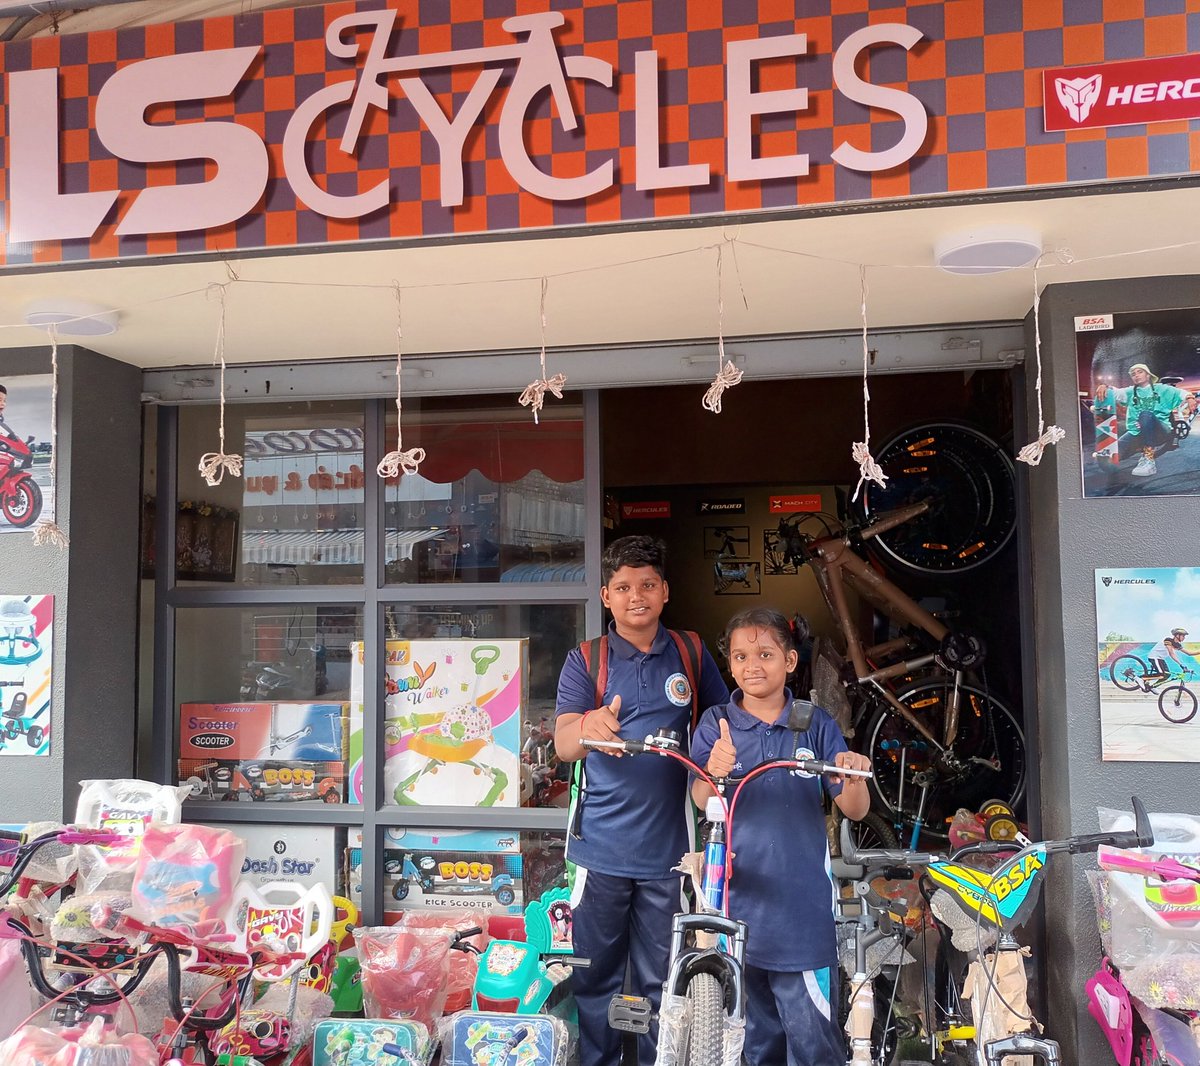 #LScycles 🚲 
#Madurai #NammaMadurari

ReadyToRiide
Mother special gift to thie Kids 

#MyFirstCycle #HappyFamily #HappyCycling #Healthy